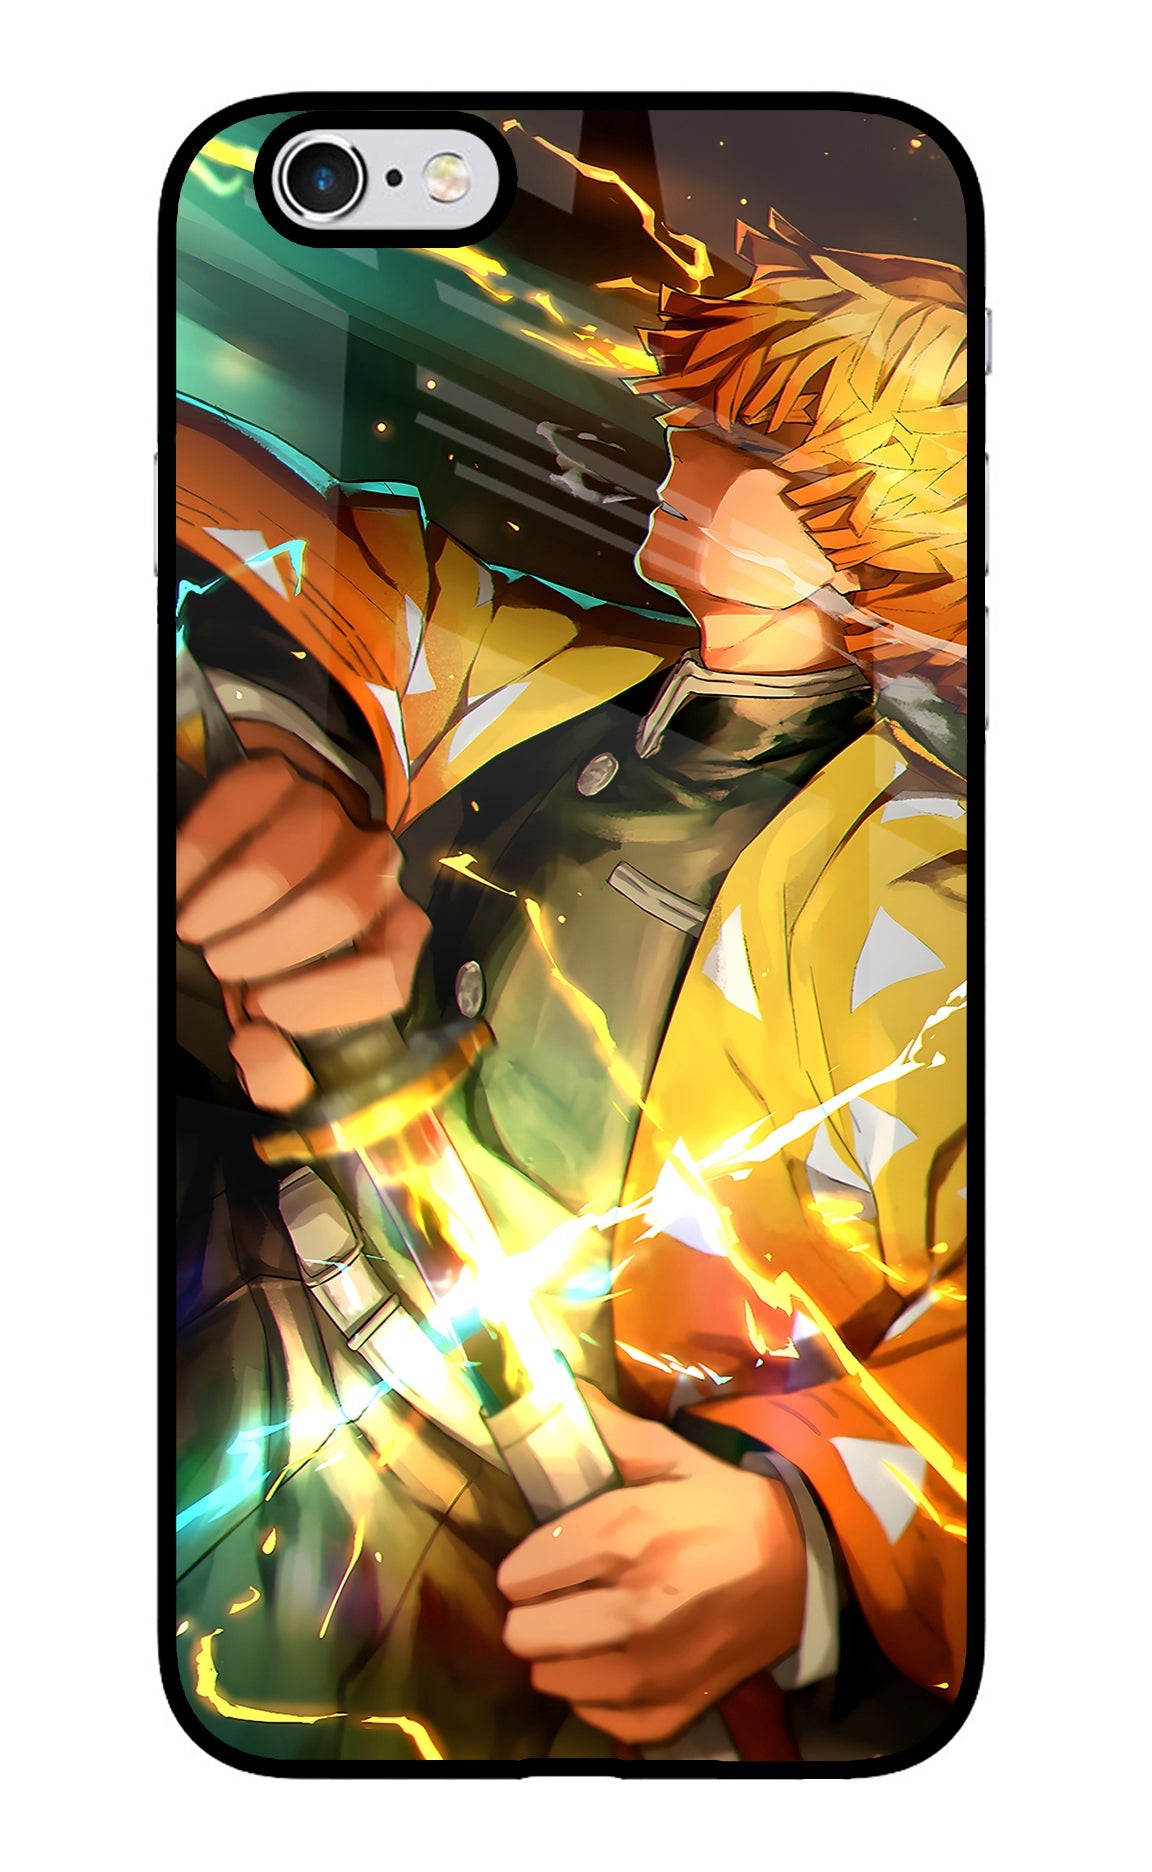 Demon Slayer iPhone 6/6s Back Cover